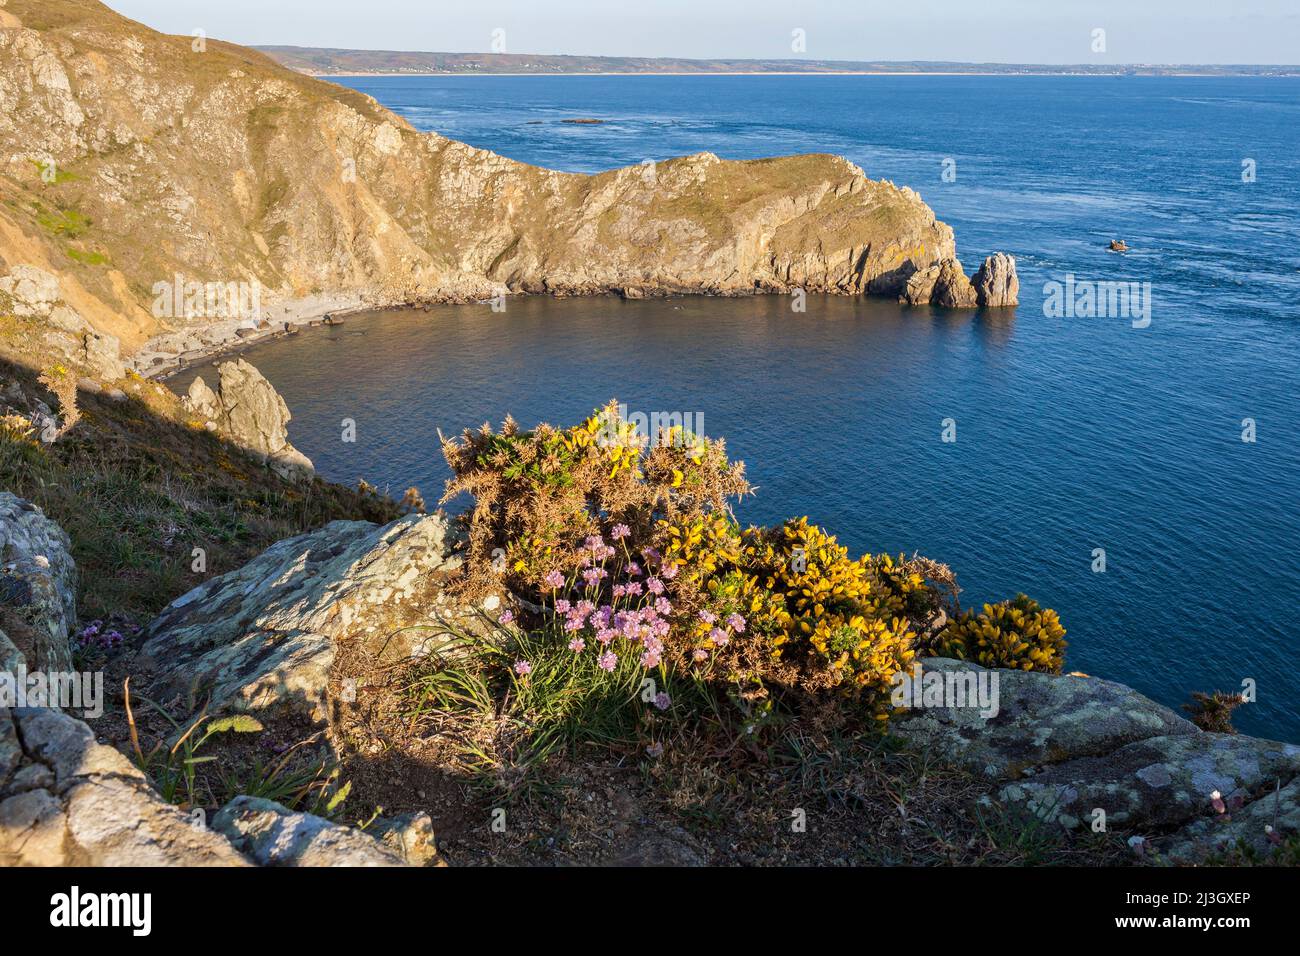 France, Manche, Cotentin, Cape Hague, Jobourg, Sennival Cove, view of Nez de Jobourg from GR223 coastal path and grove of prostrate brooms (Sarothamnus scoparius maritimus) with sea thrifts (Armeria maritima) in the foreground Stock Photo